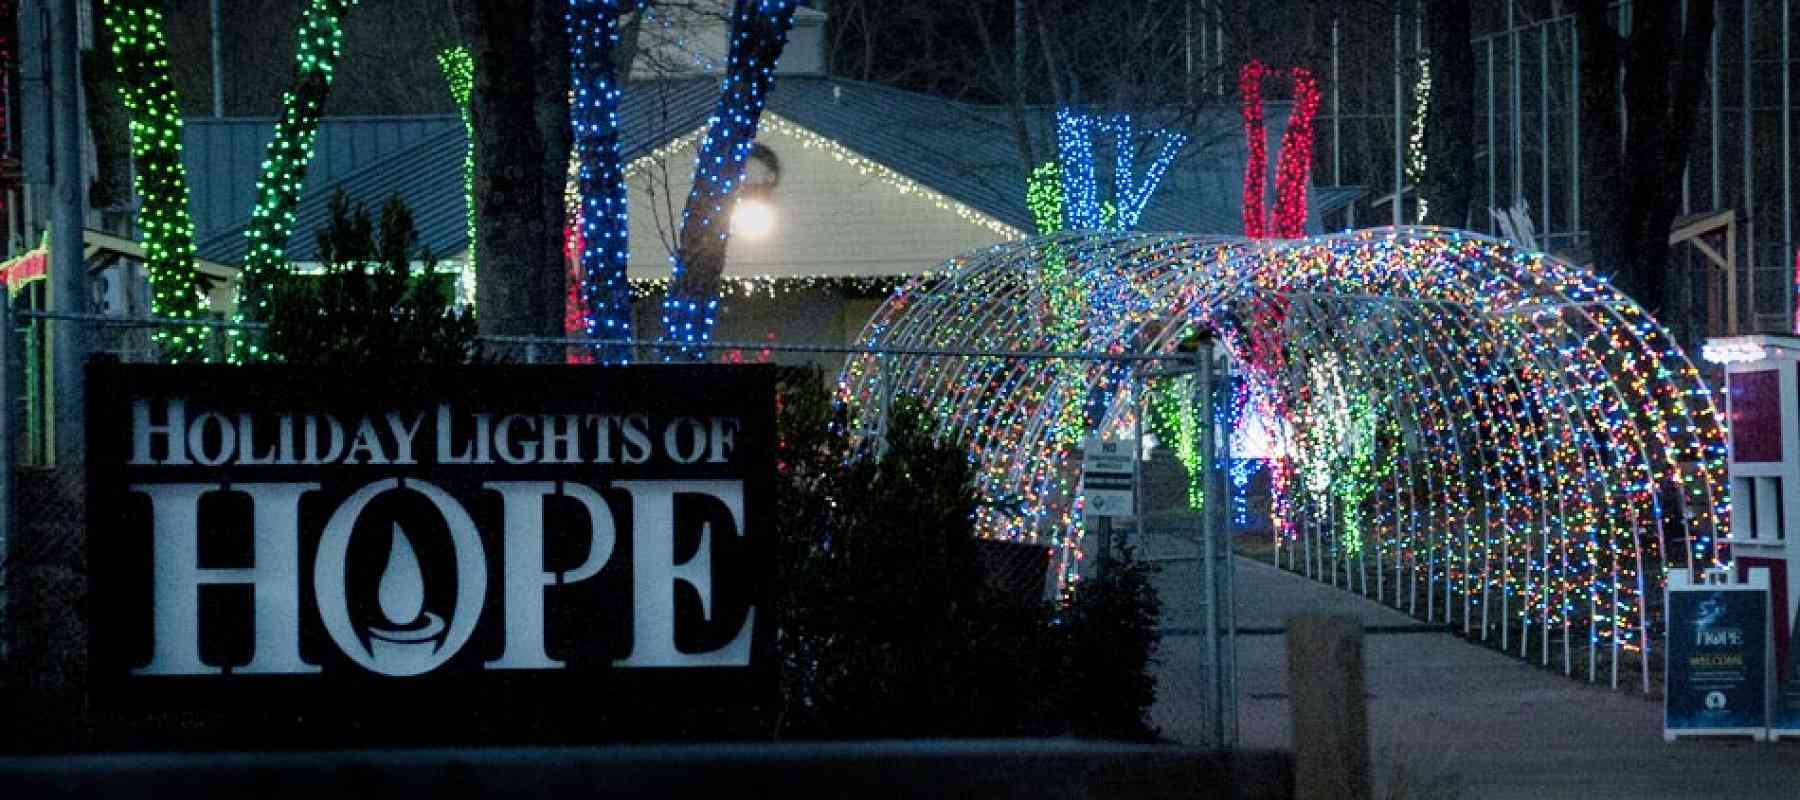 Lights of Hope Sale Delayed; Volunteers to Run This Year’s Show